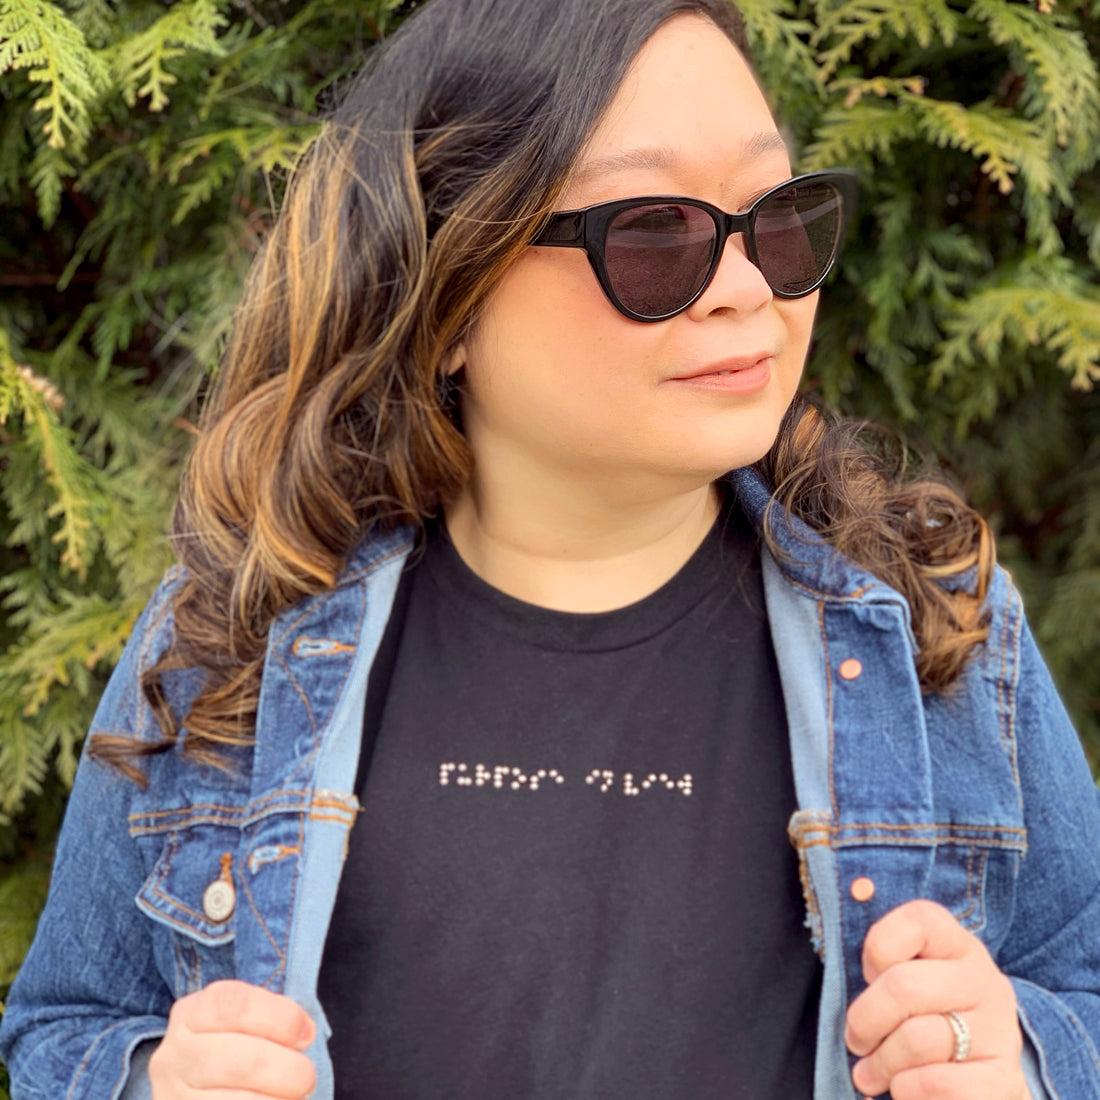 Anne wearing Aille Design Custom Braille T-Shirt “purpose in view”. 